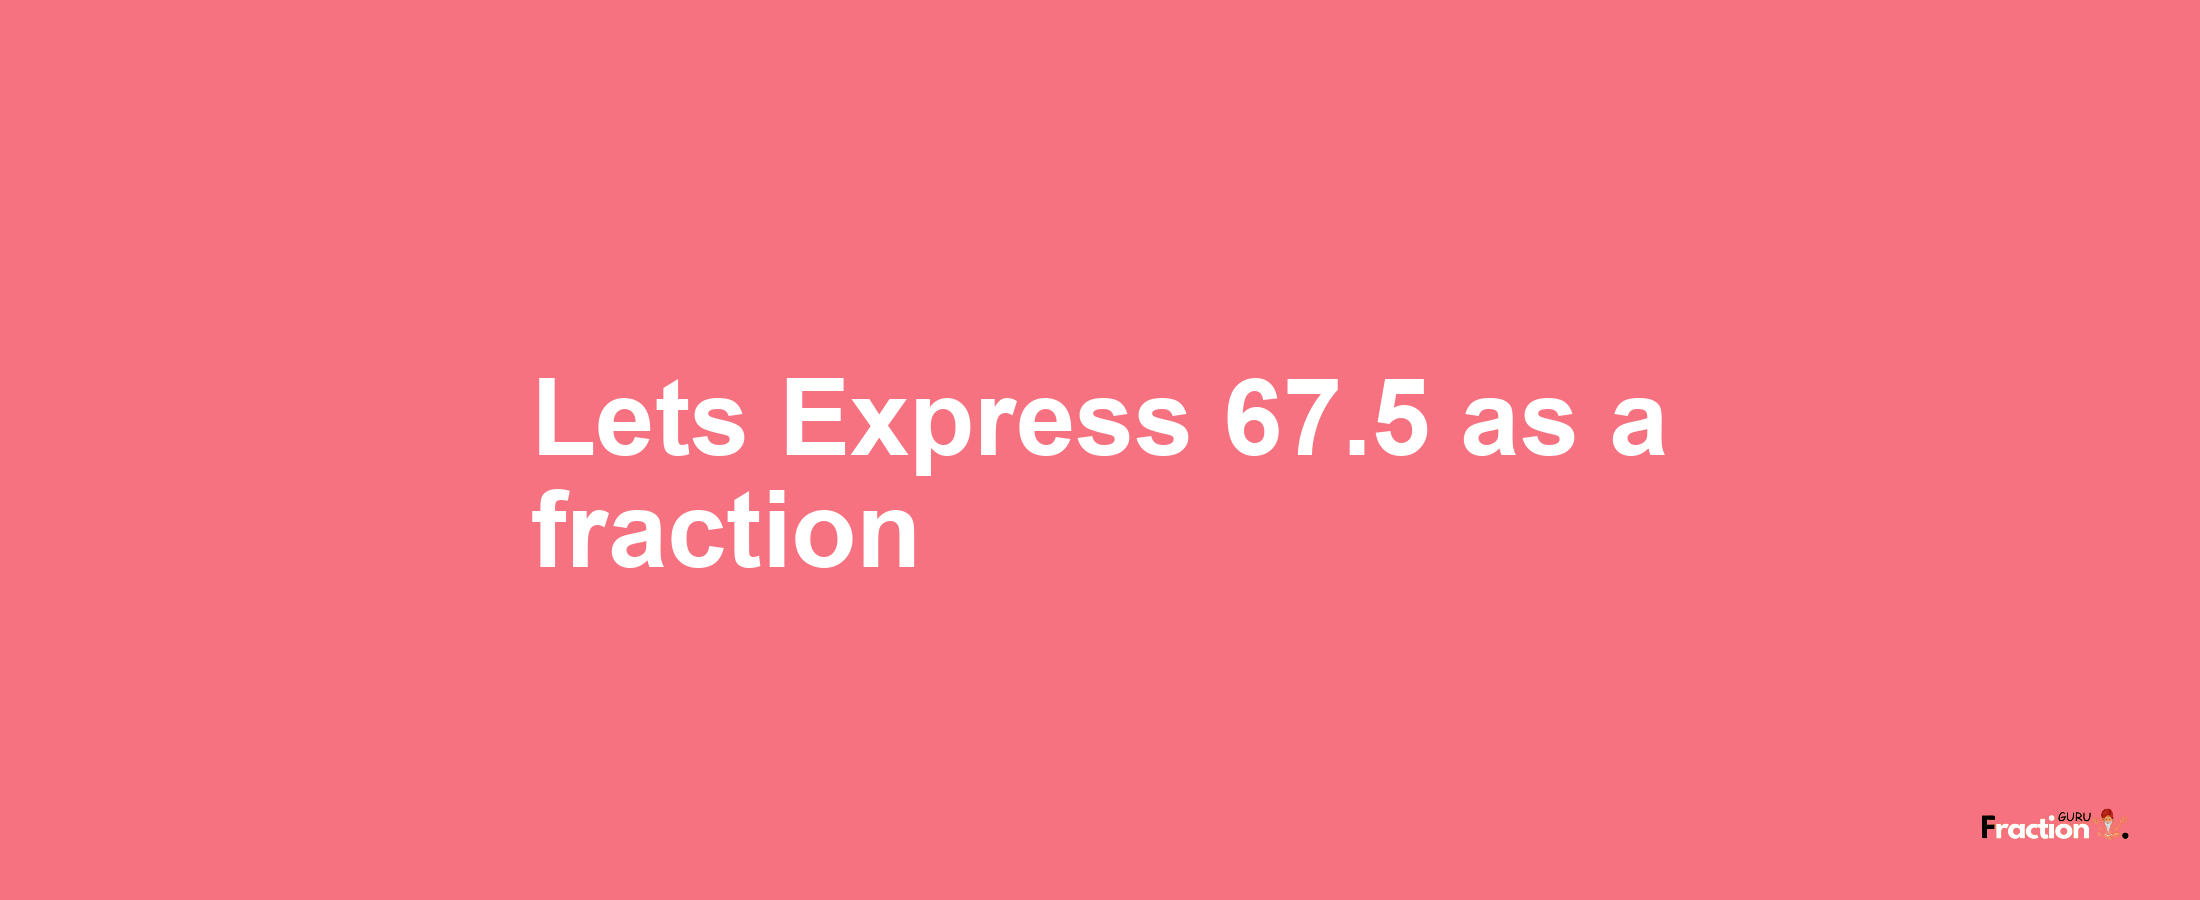 Lets Express 67.5 as afraction